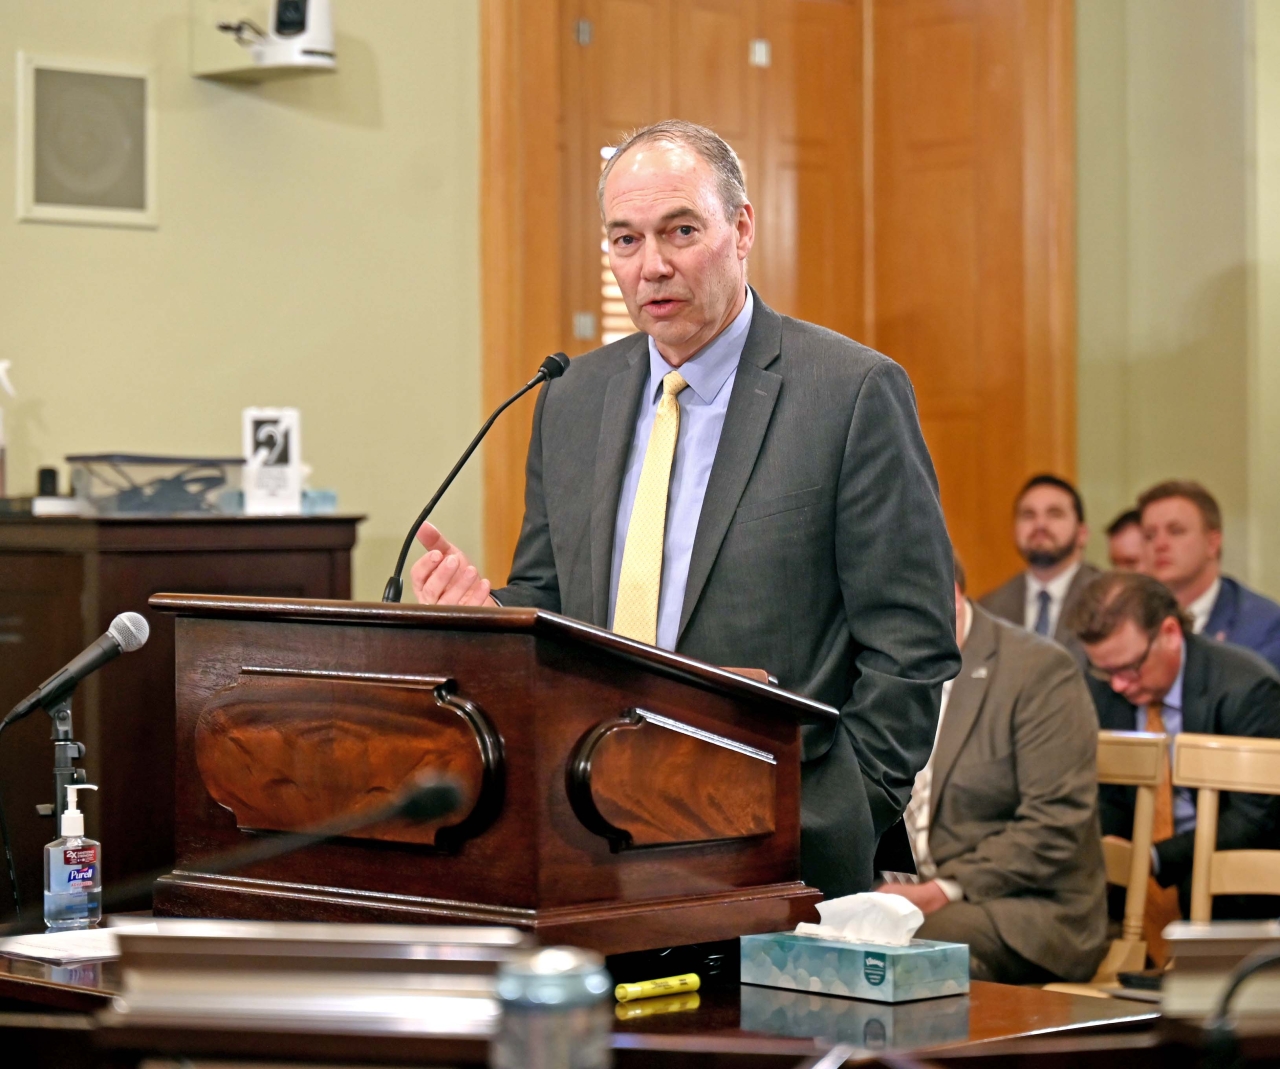 Rep. Peterson gives testimony before the House Ways and Means Committee